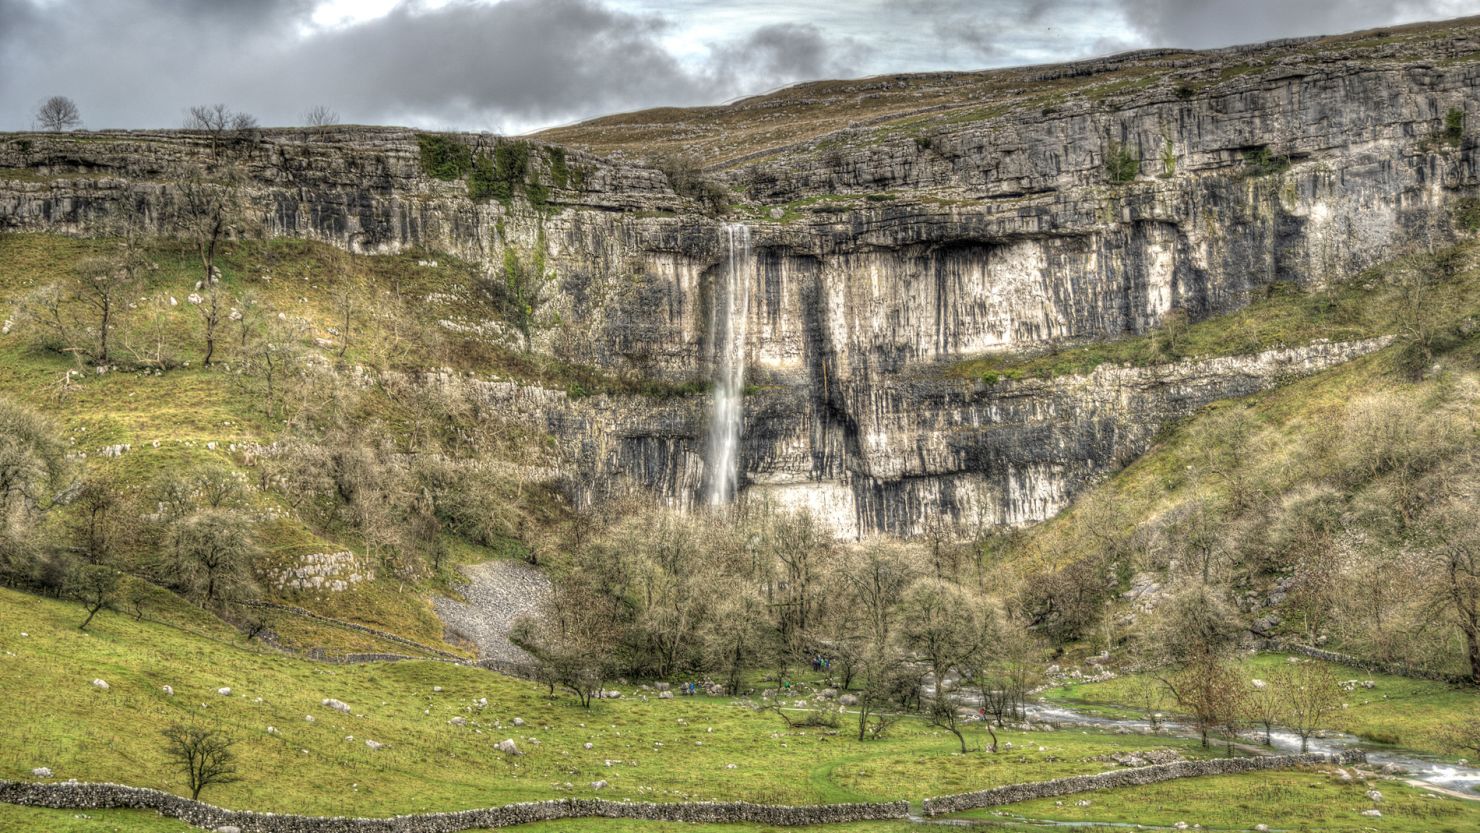 A waterfall -- which ran dry several centuries ago -- reappears at Malham Cove after the recent downpours in northern England.